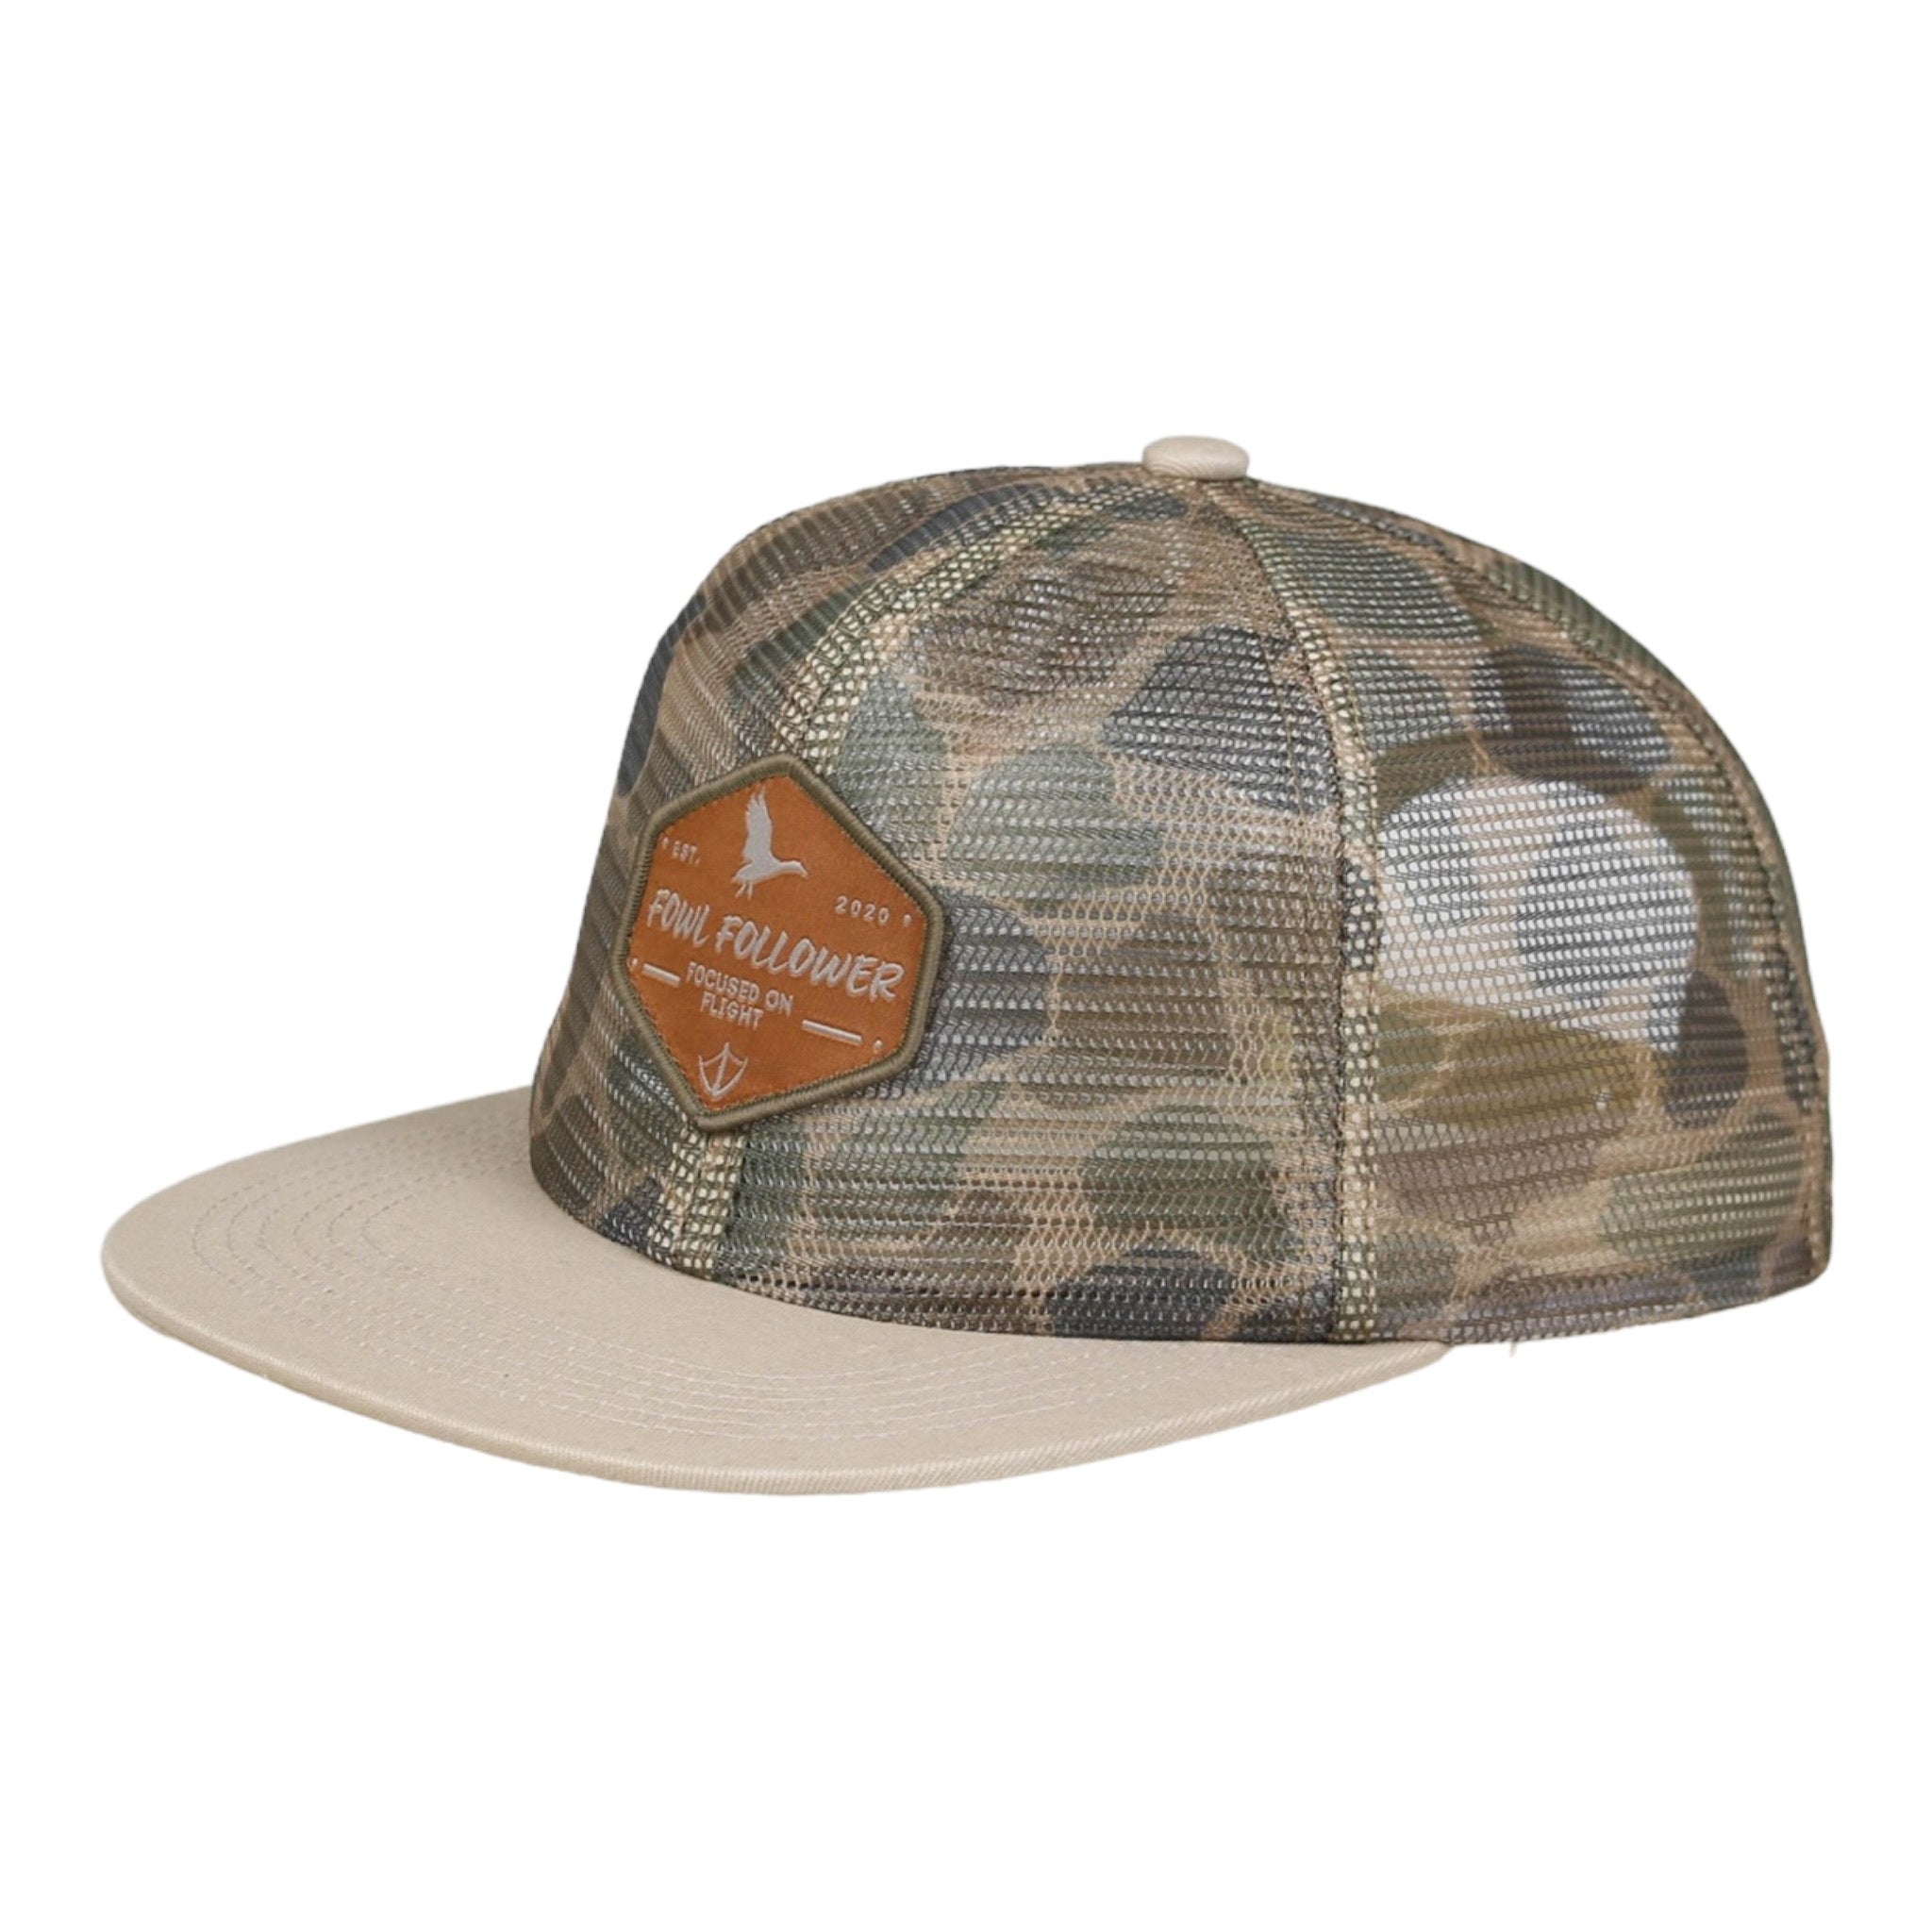 A Mesh Camo Hat with a patch on the front from Fowl Follower.